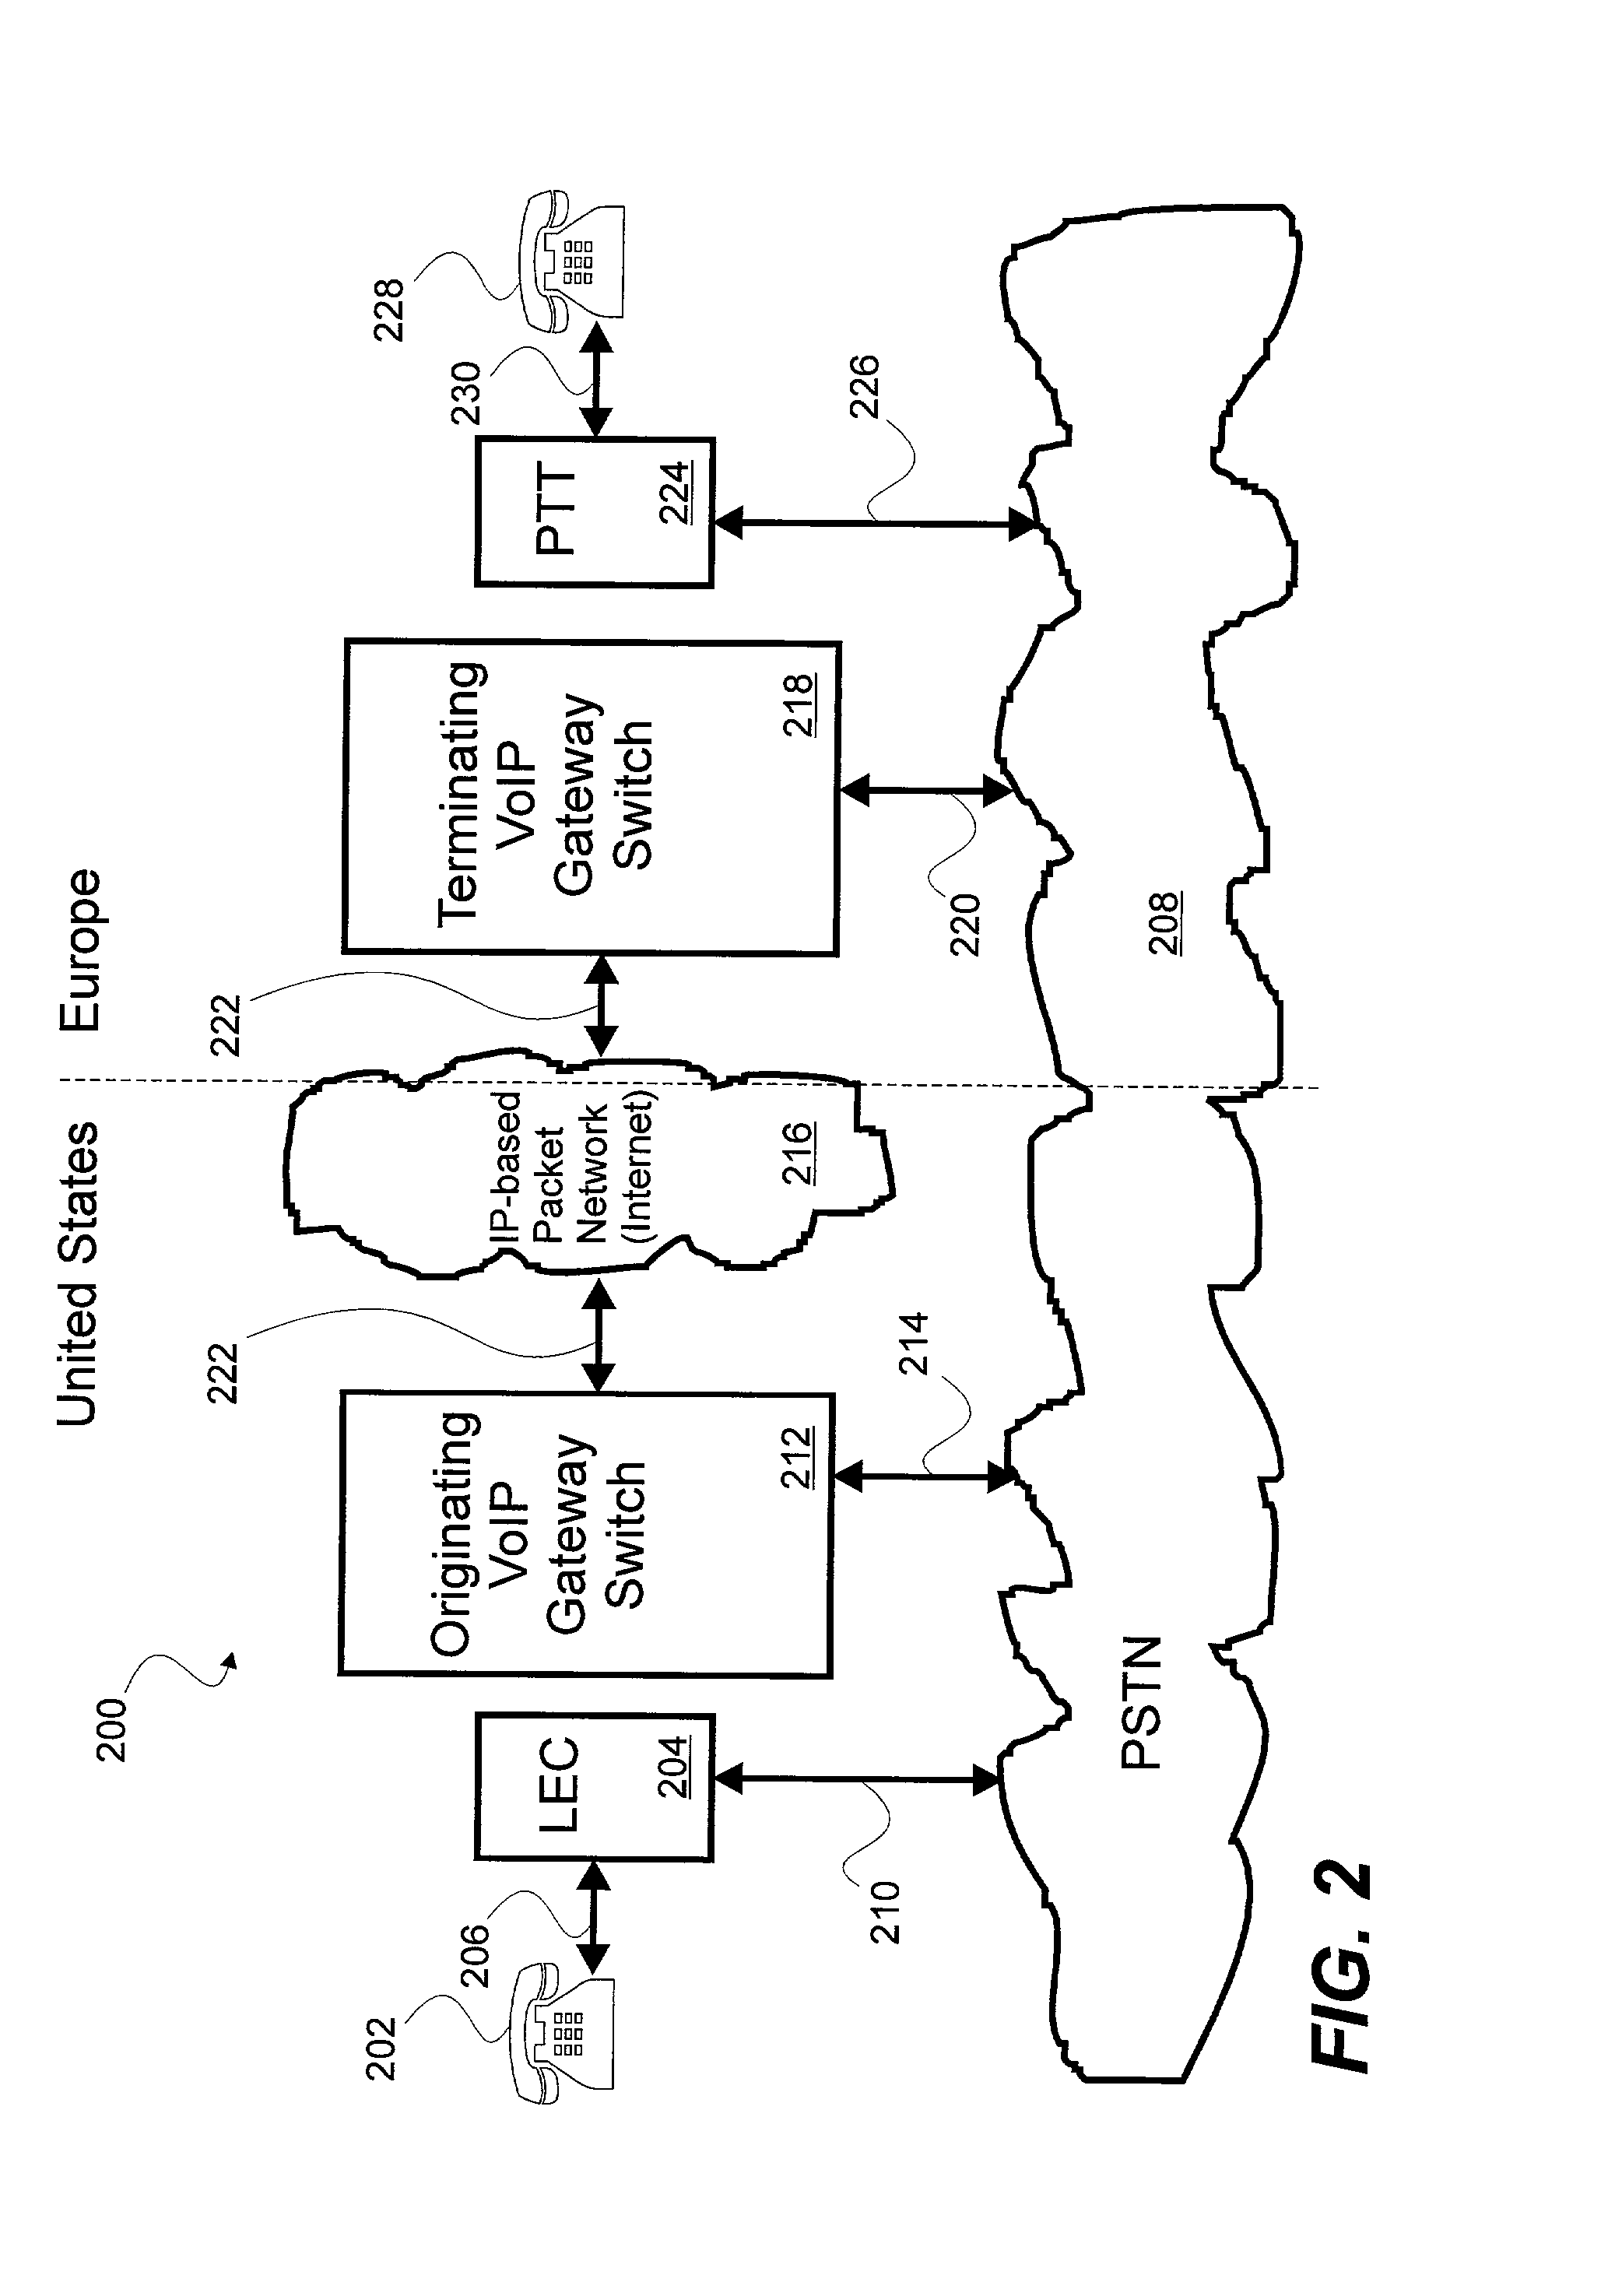 System, apparatus and method for voice over internet protocol telephone calling using enhanced signaling packets and localized time slot interchanging